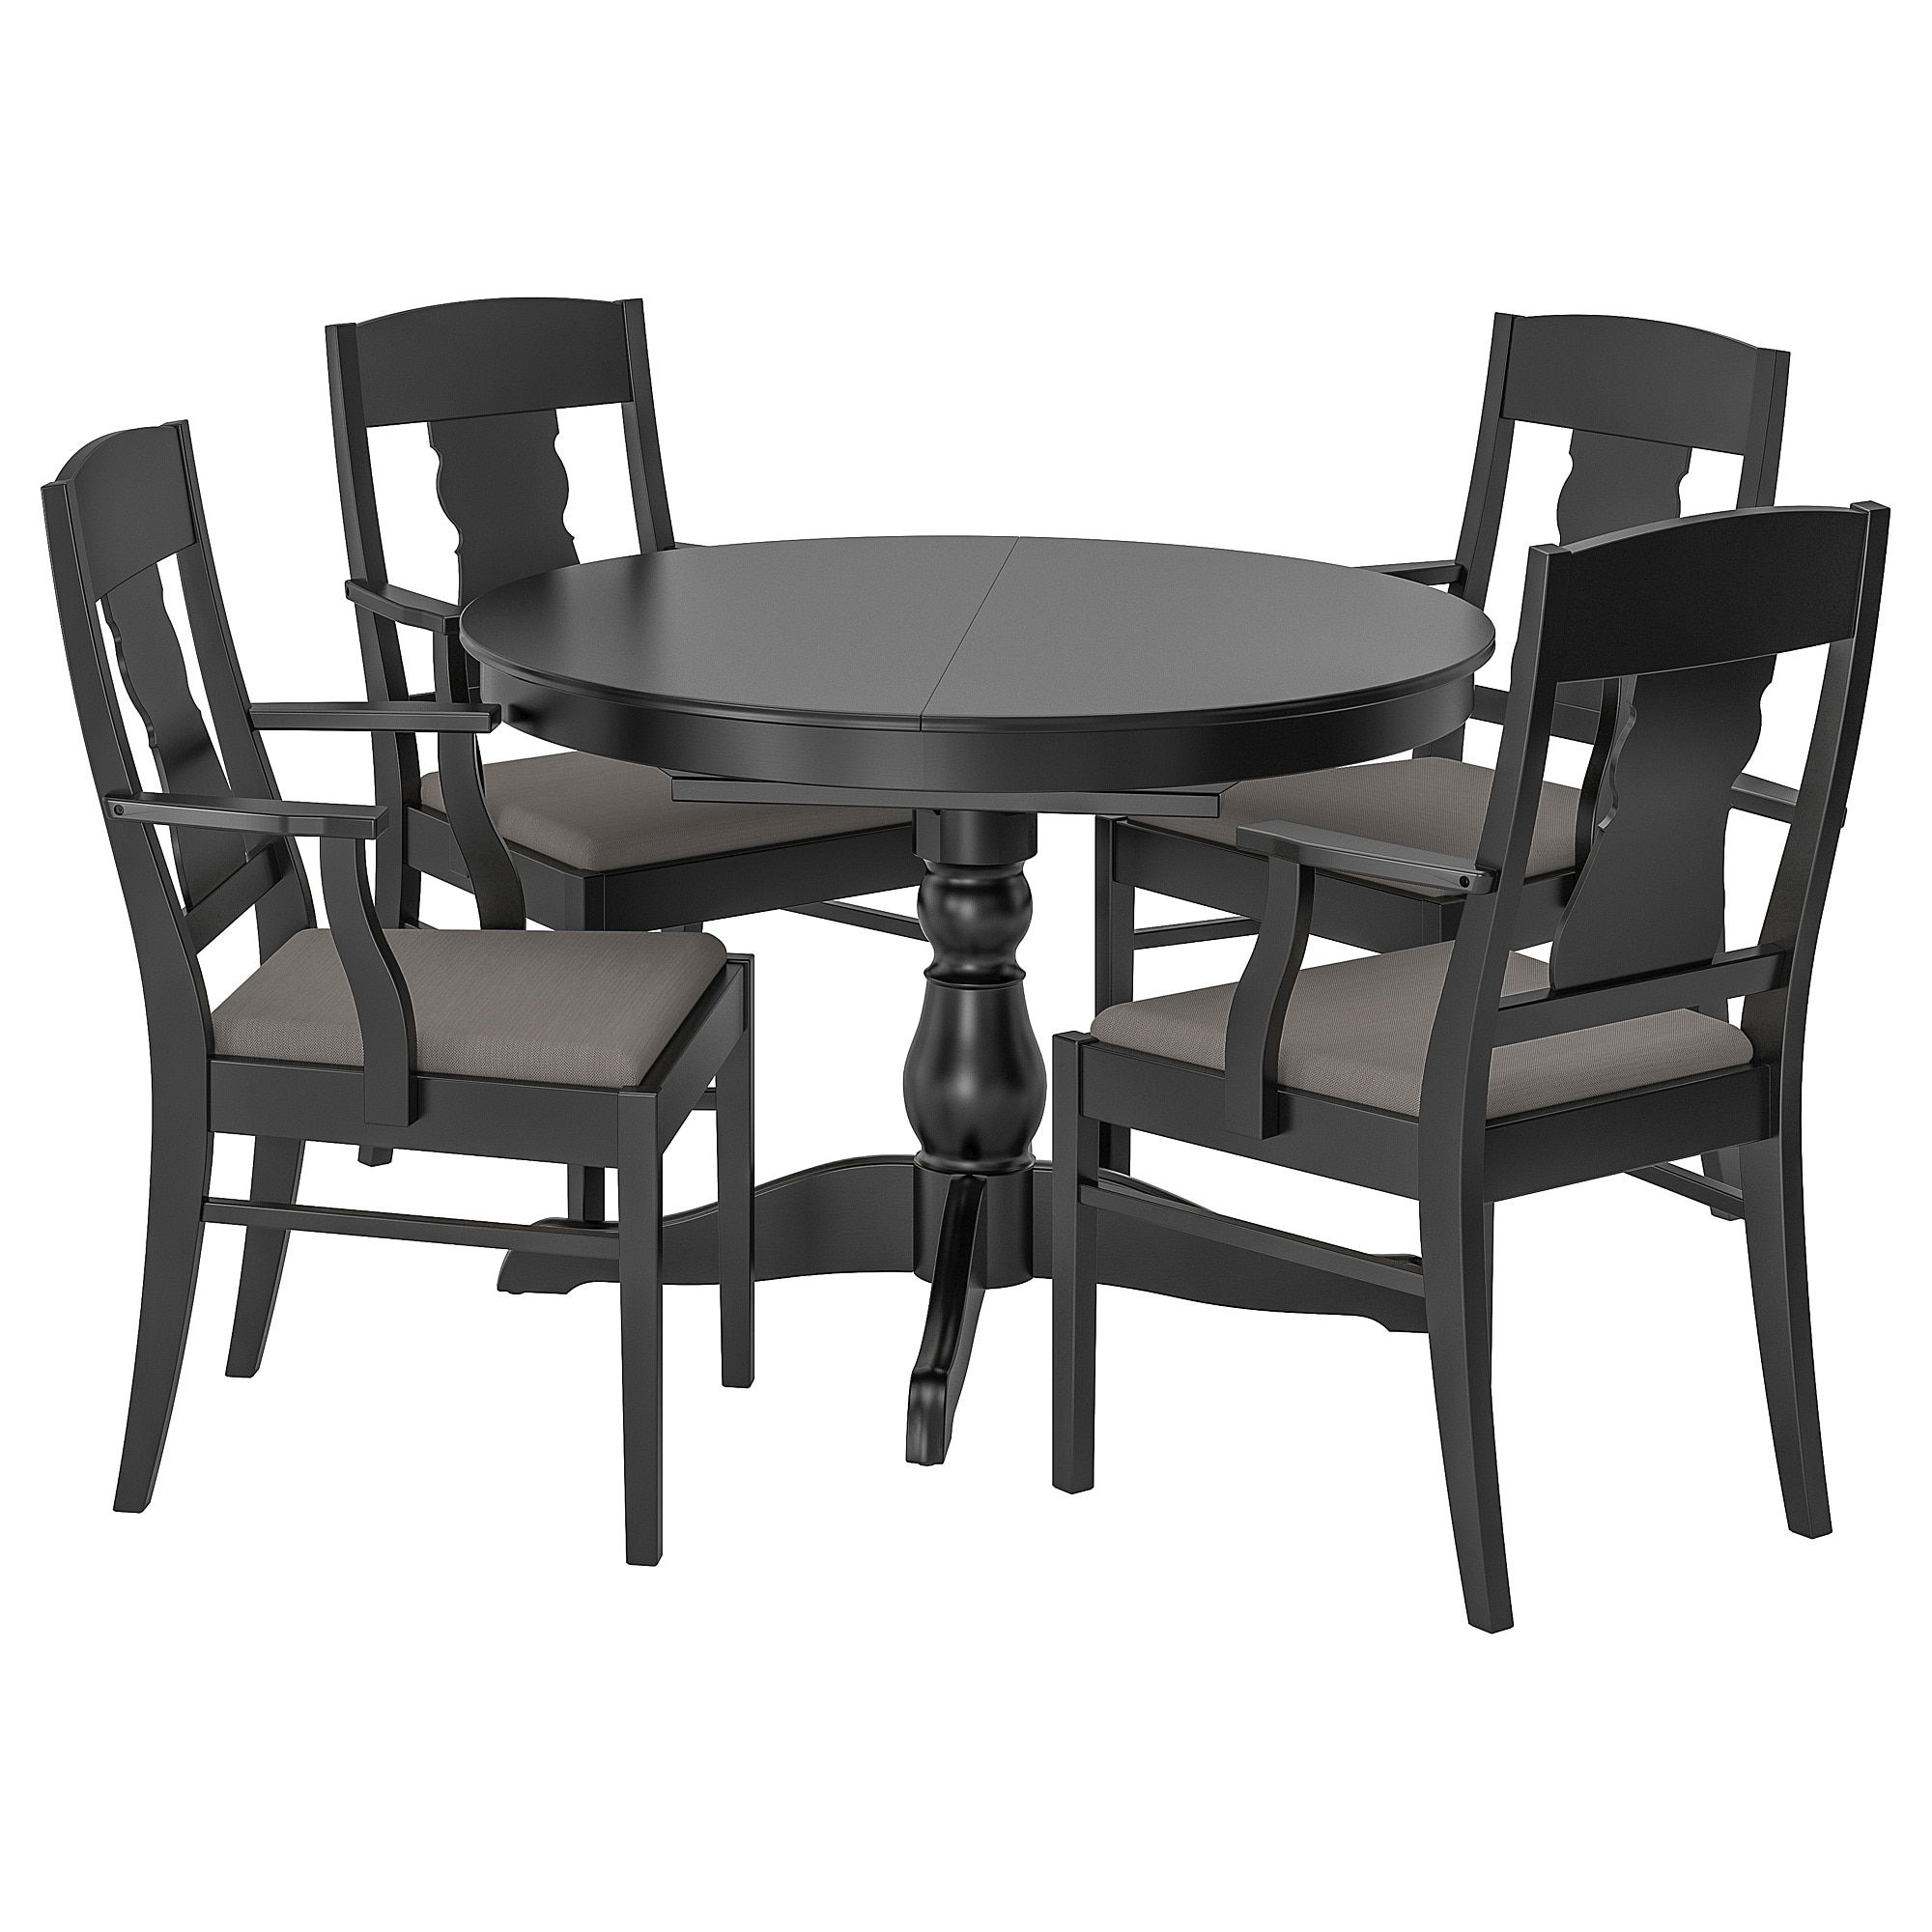 Table And 4 Chairs Ingatorp / Ingatorp Black For Most Recent Castellanos Modern 5 Piece Counter Height Dining Sets (View 19 of 20)